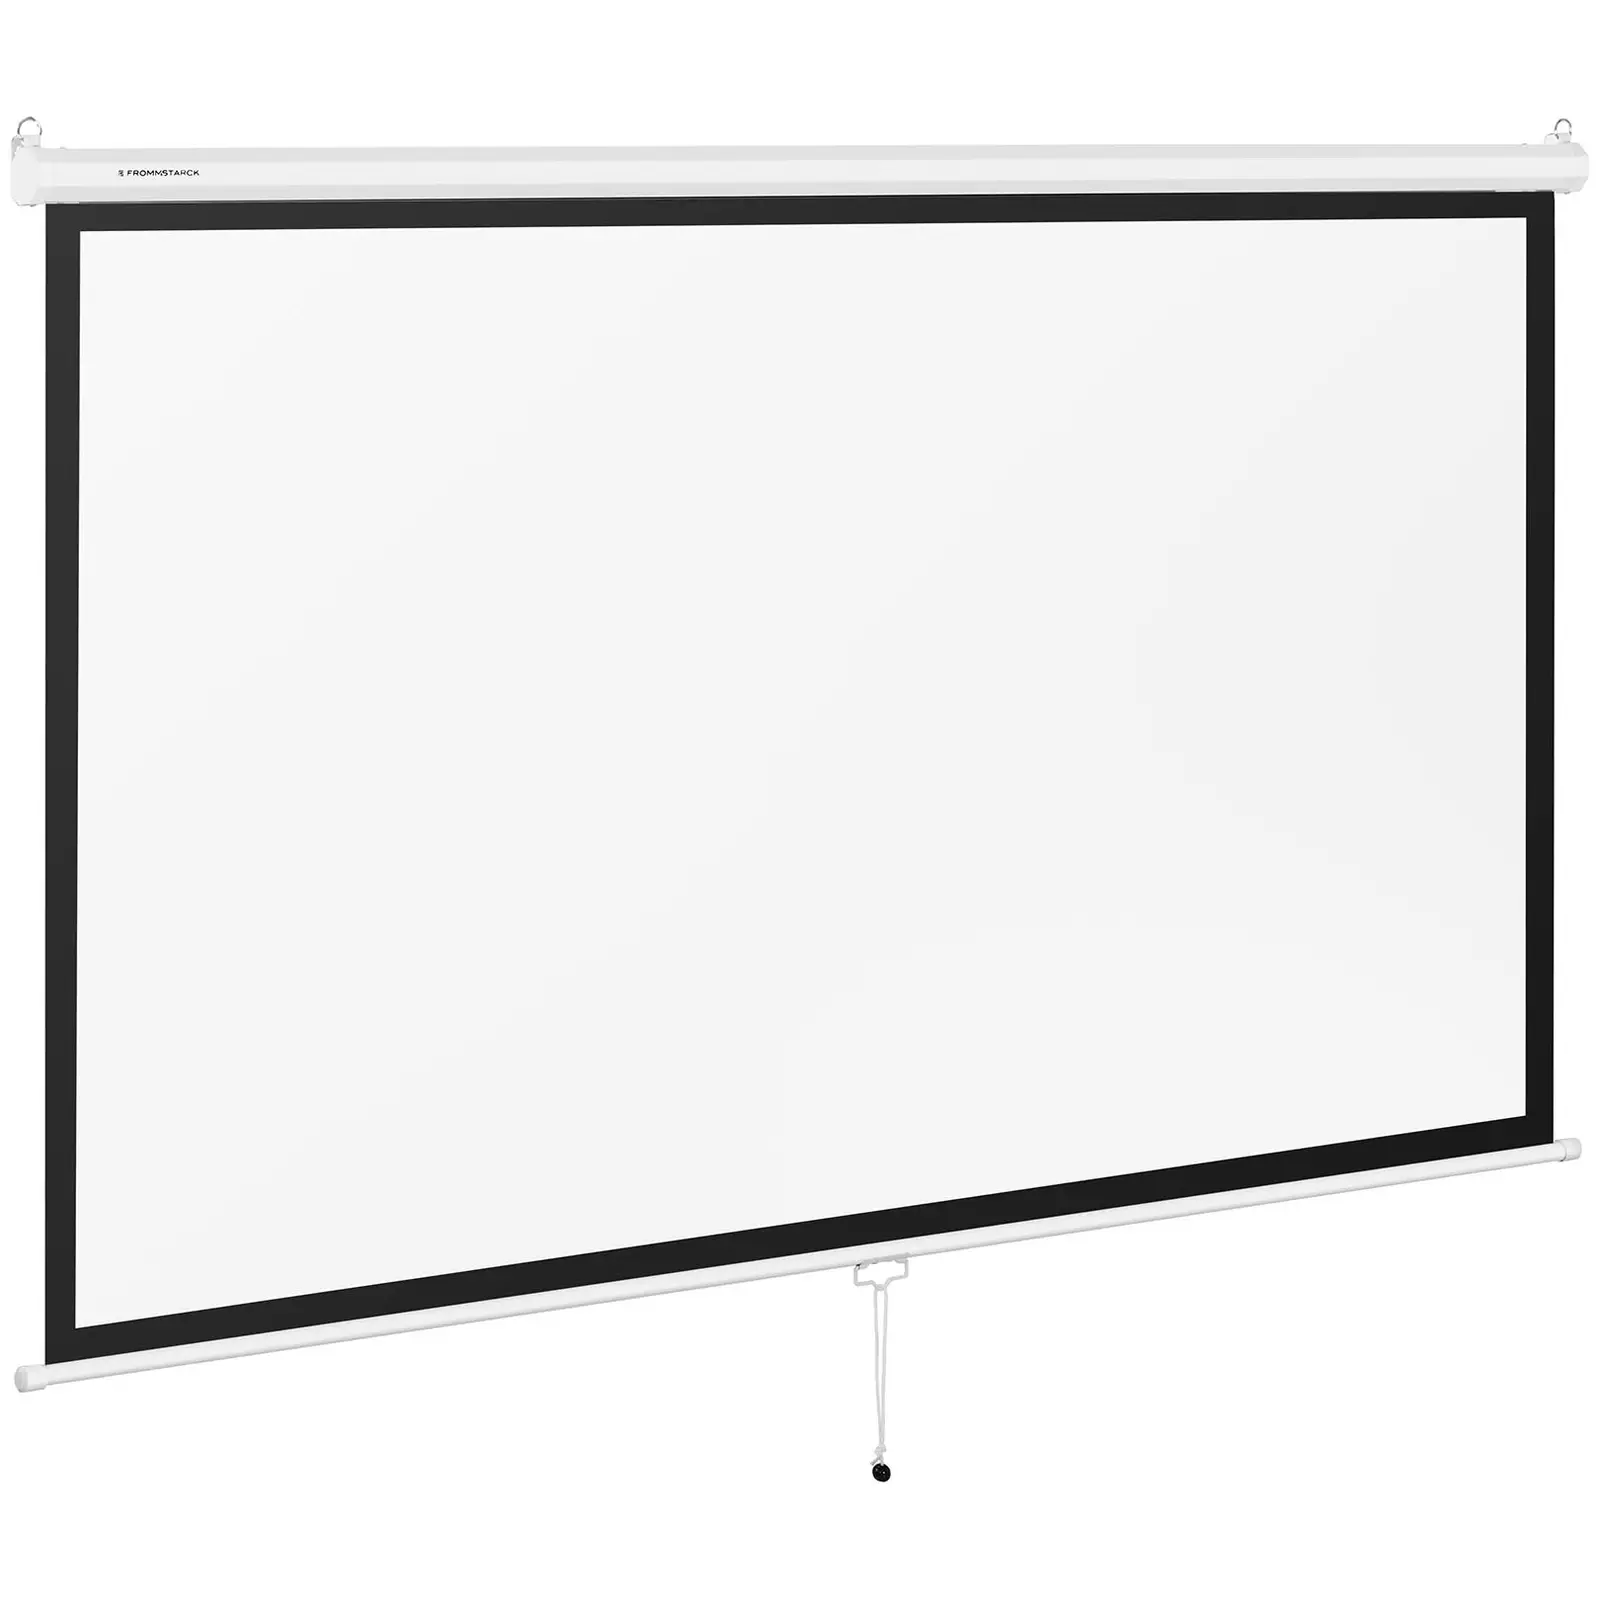 Projection Screen Wall-/ceiling-mounted Projector Screen 229.5x145cm 16:9